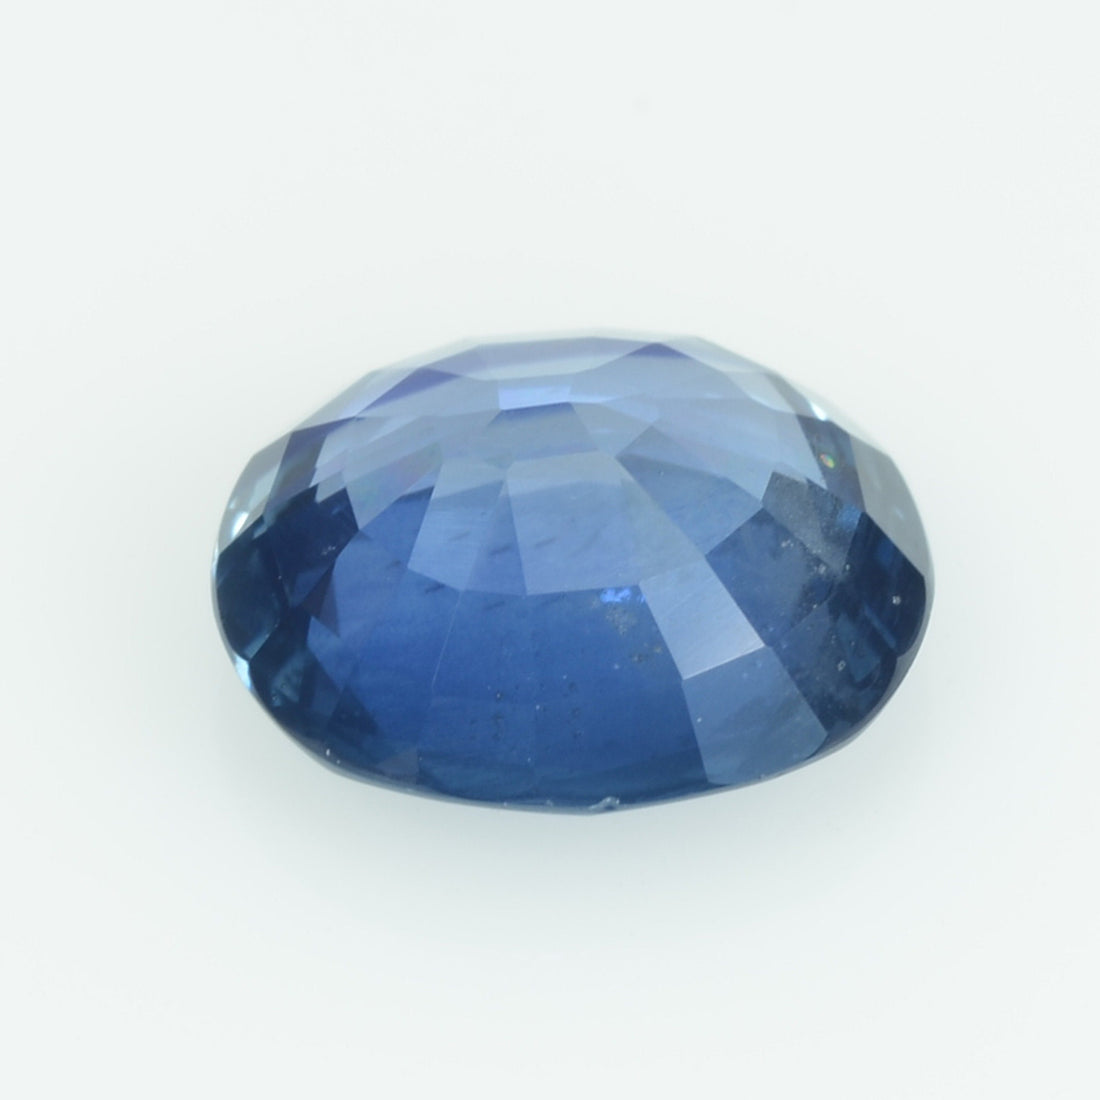 1.68 Cts Natural Blue Sapphire Loose Gemstone Oval Cut